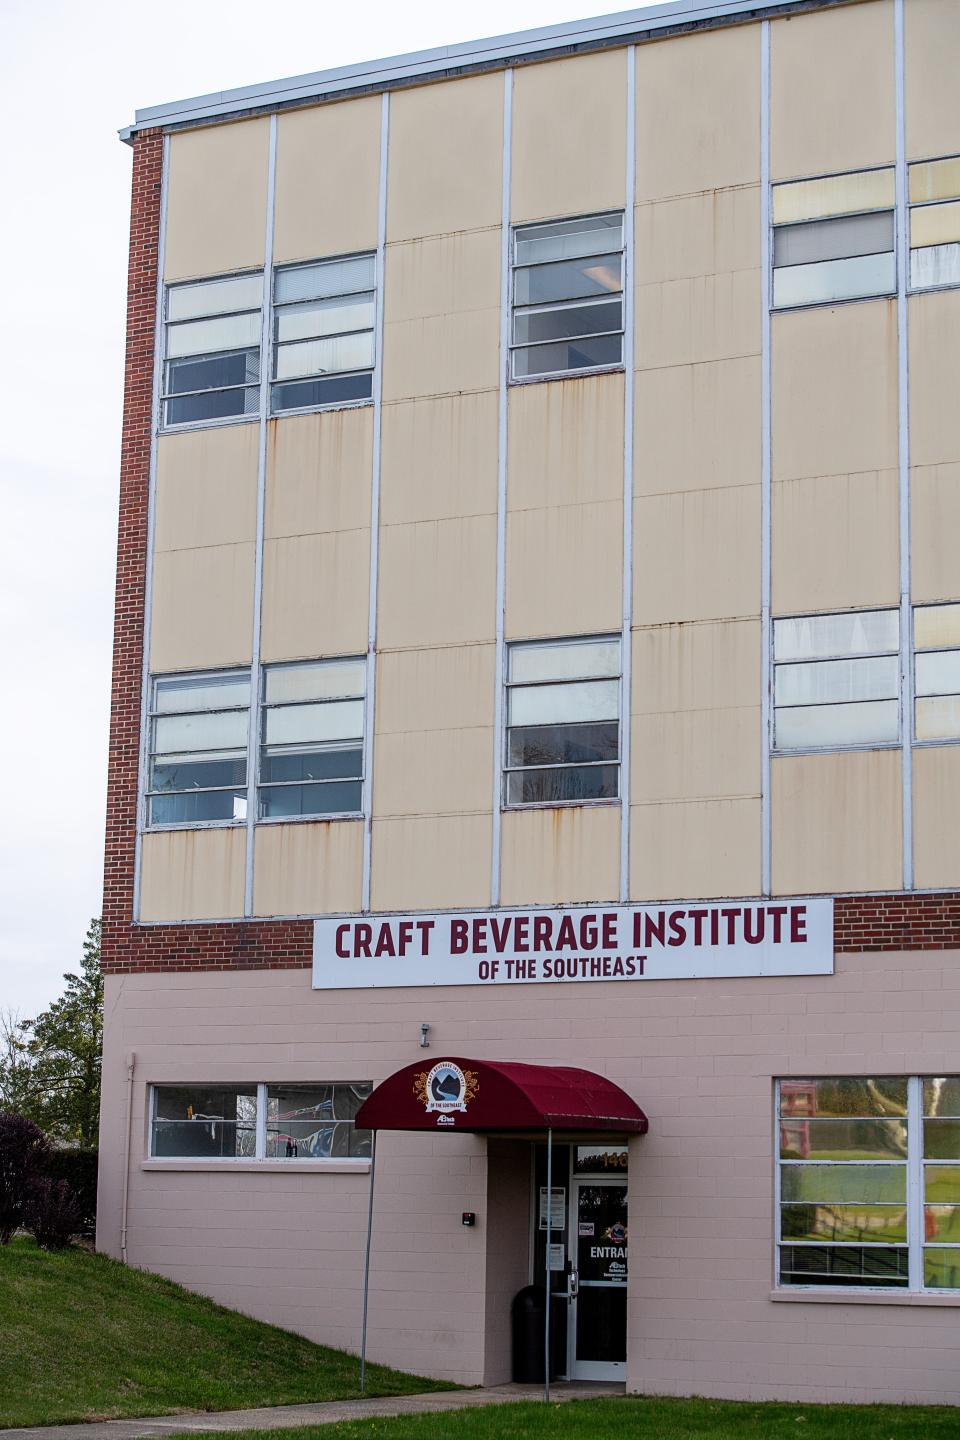 The Craft Beverage Institute of the Southeast on A-B Tech’s Enka-Candler campus.